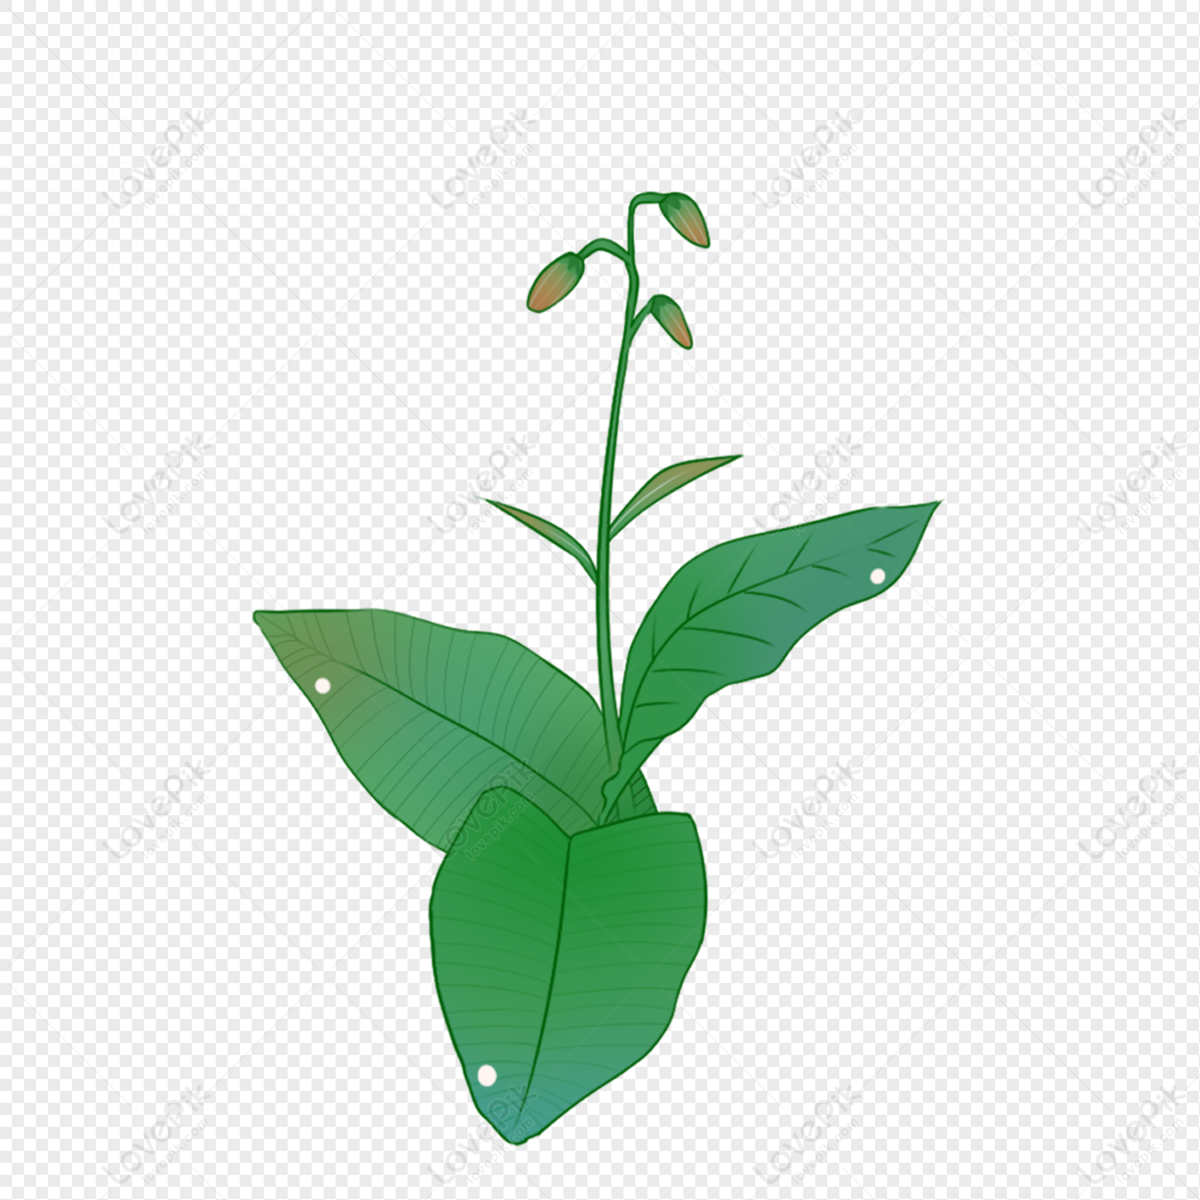 Cartoon Green Botanical Illustration PNG White Transparent And Clipart  Image For Free Download - Lovepik | 401286322